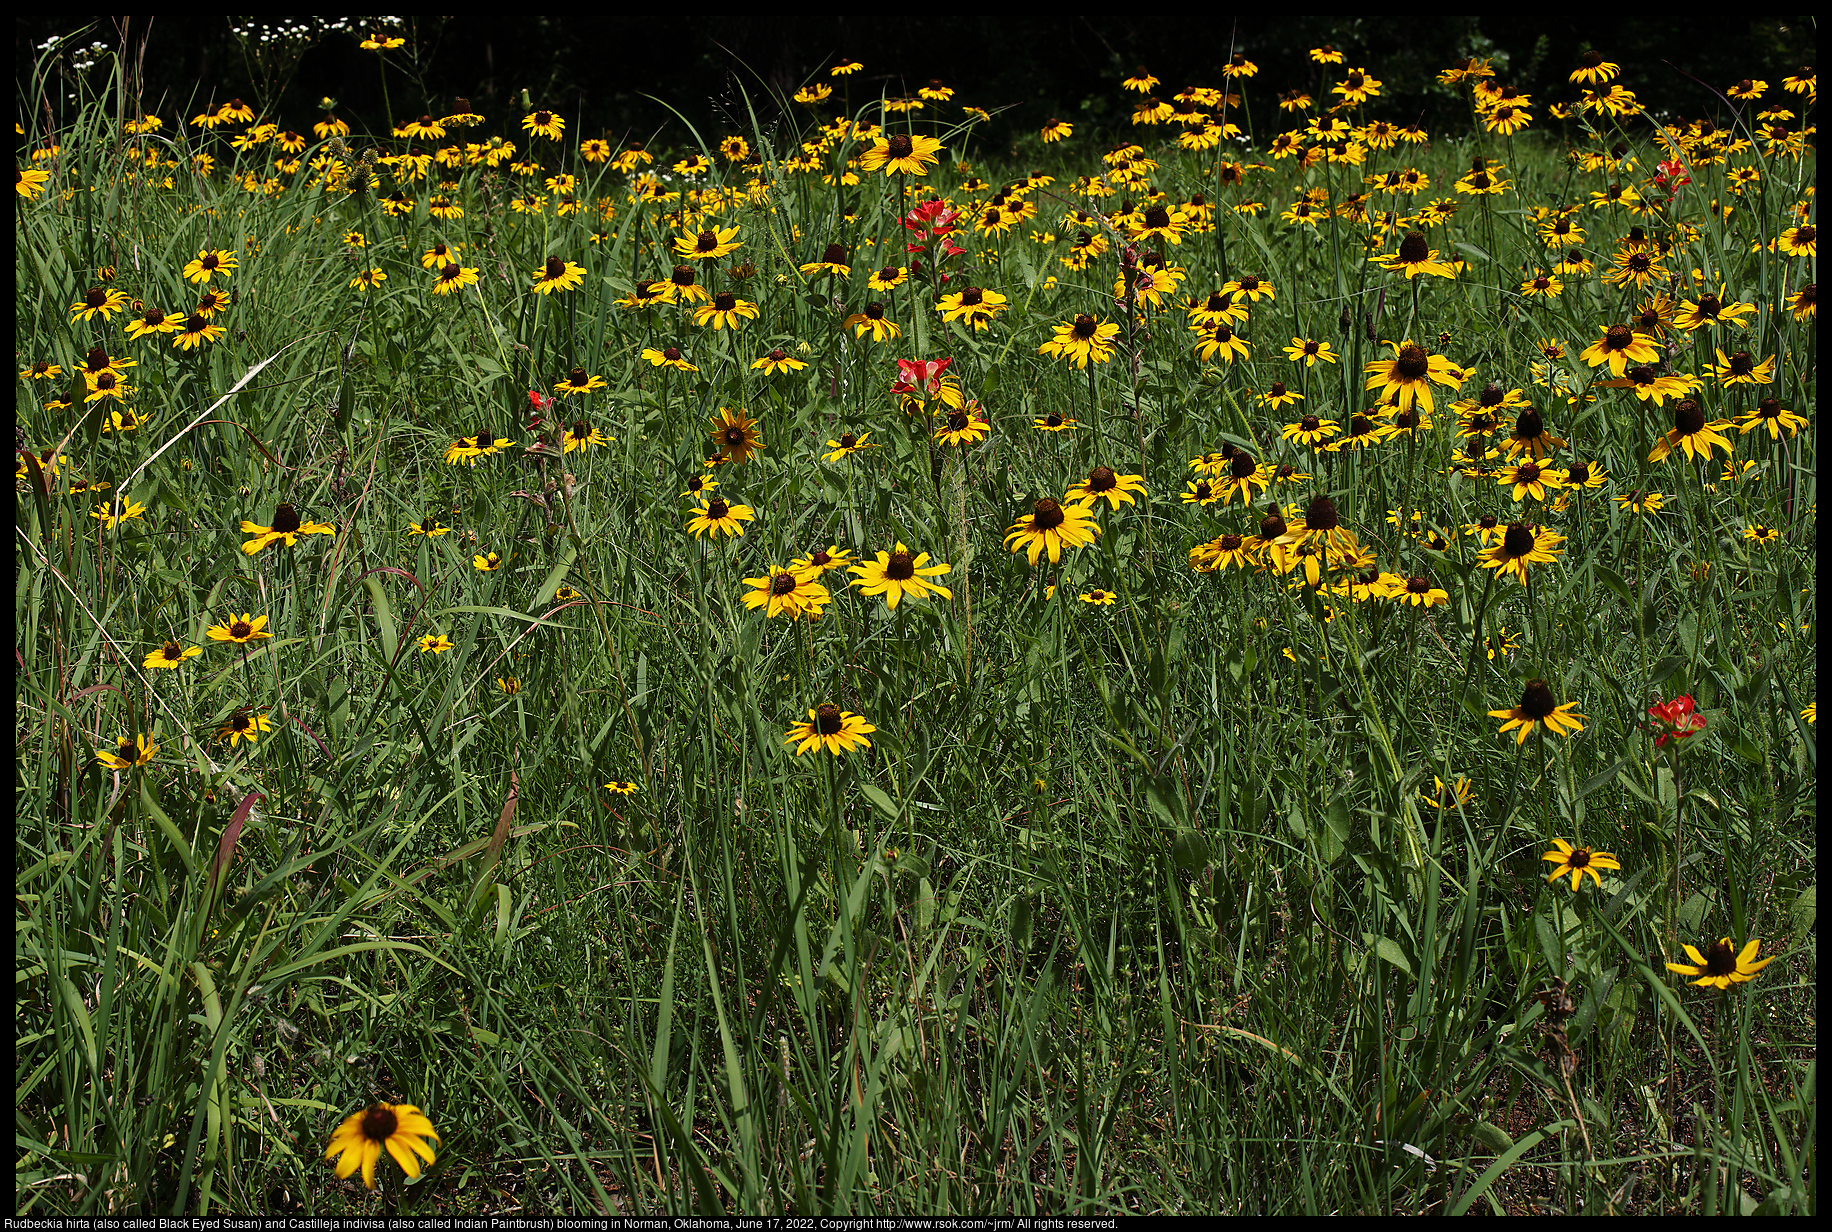 Rudbeckia hirta (also called Black Eyed Susan) and Castilleja indivisa (also called Indian Paintbrush) blooming in Norman, Oklahoma, June 17, 2022